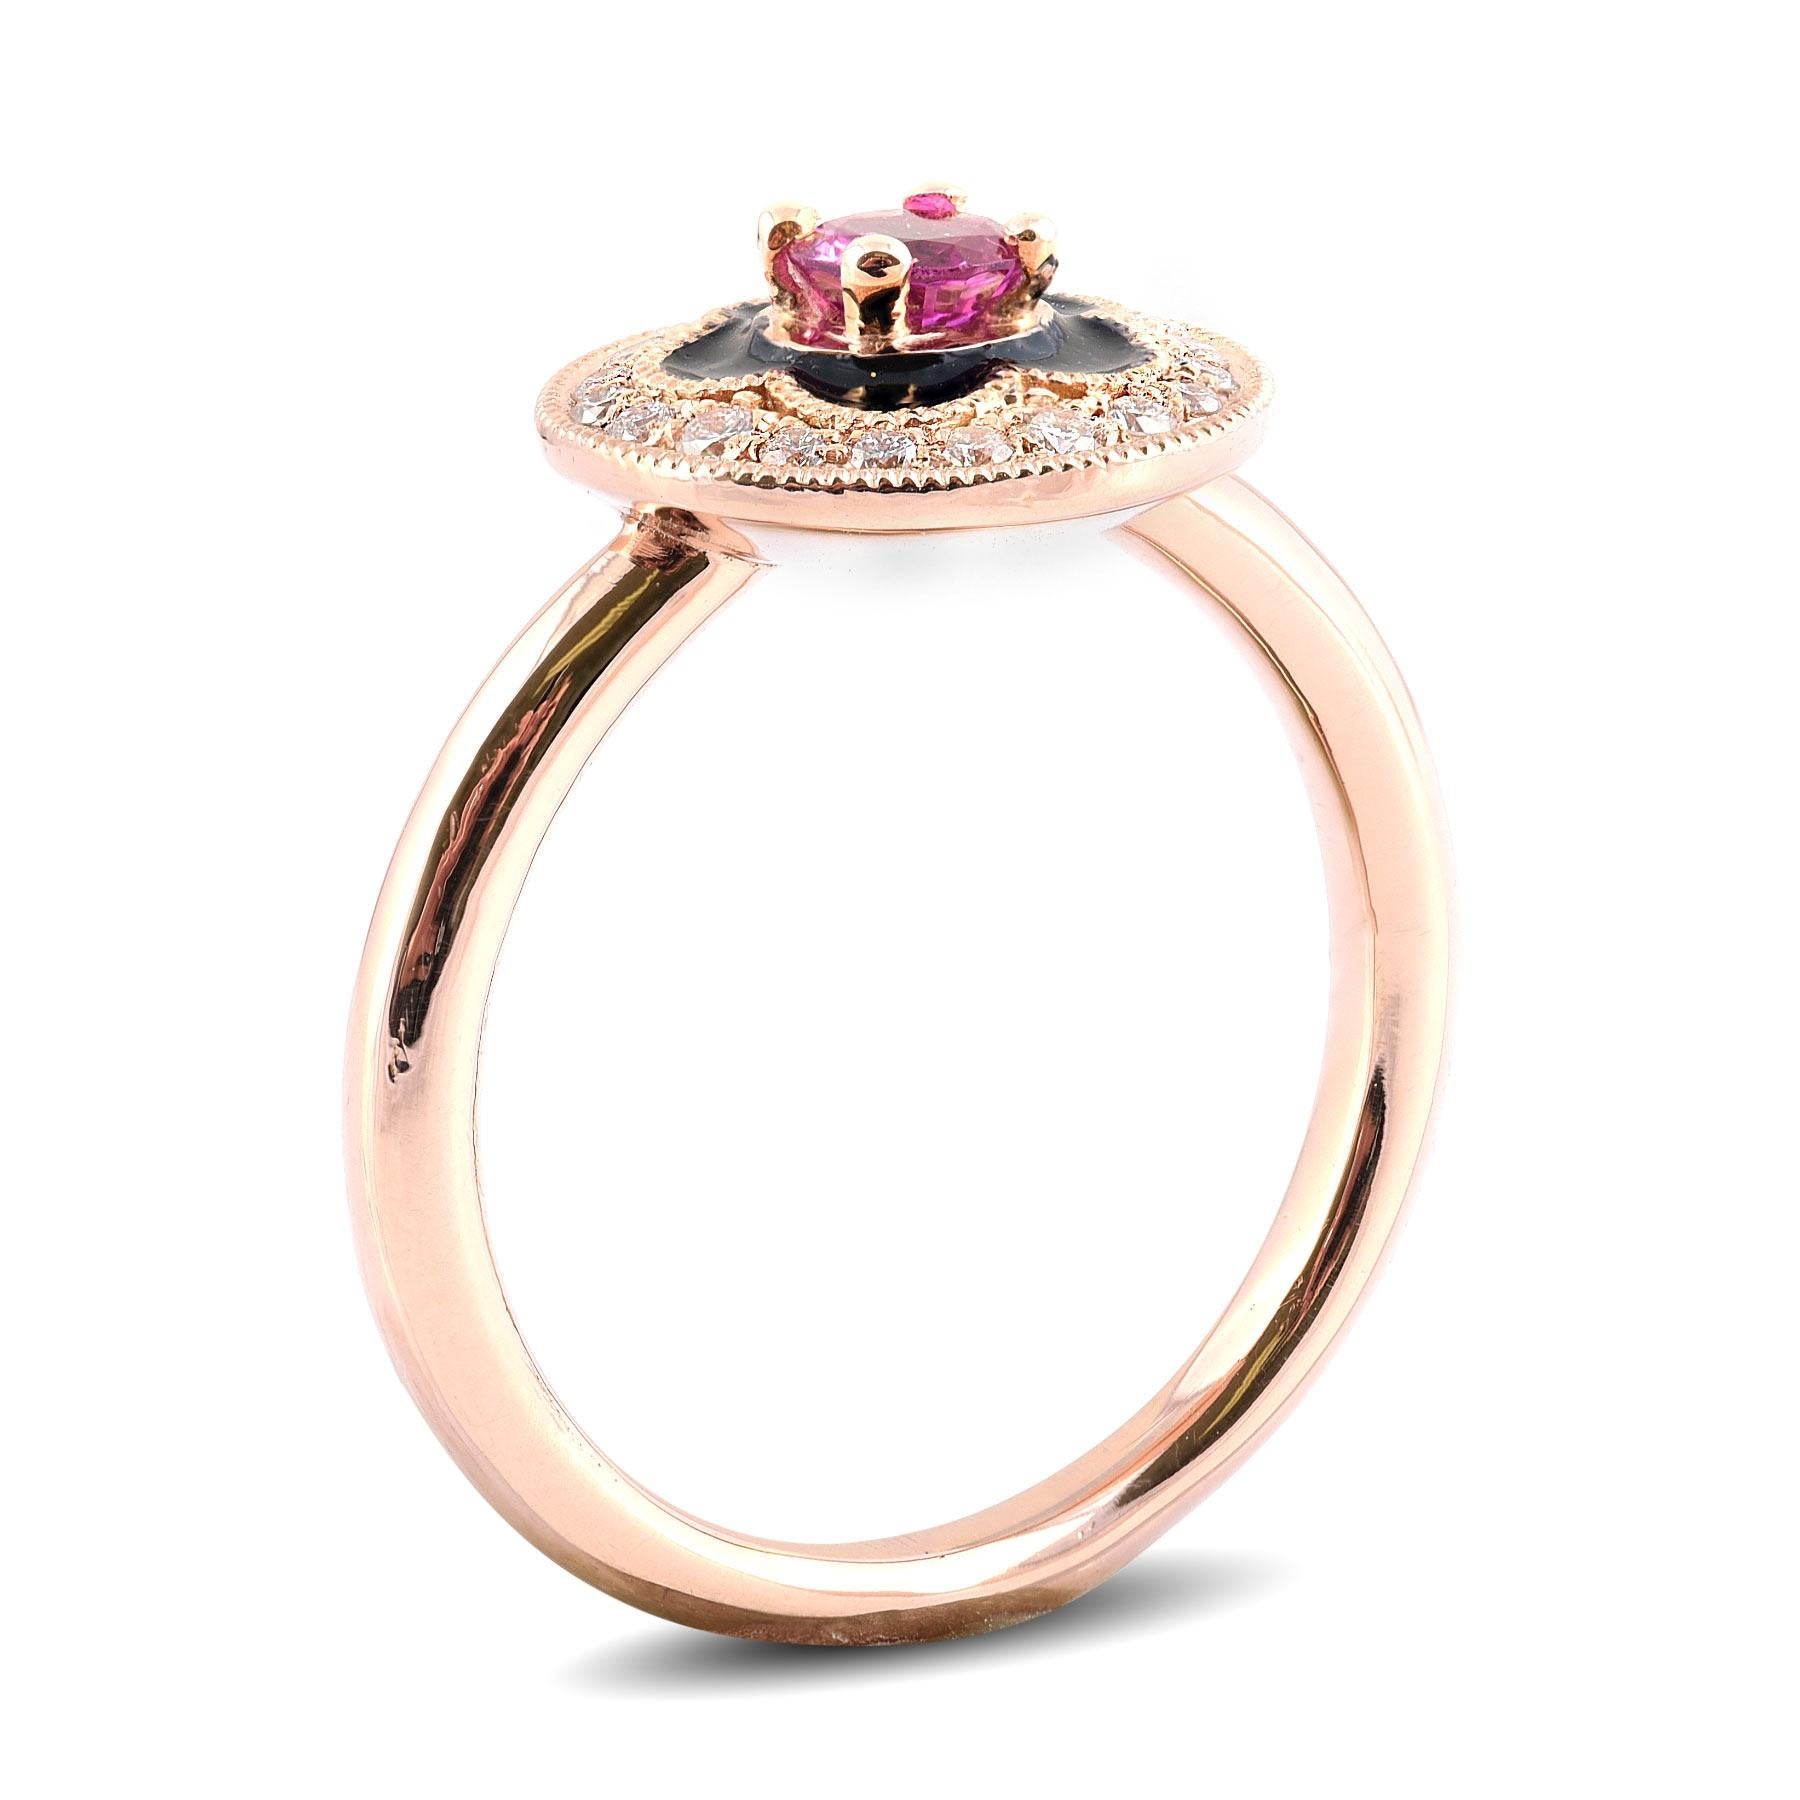 This easy-to-wear ring is adorned with a distinctive 0.30-carat Pink Sapphire, set against the striking backdrop of black enamel. Crafted in 14K rose gold, this floral-inspired piece is not just a ring but a characterful accessory designed to turn